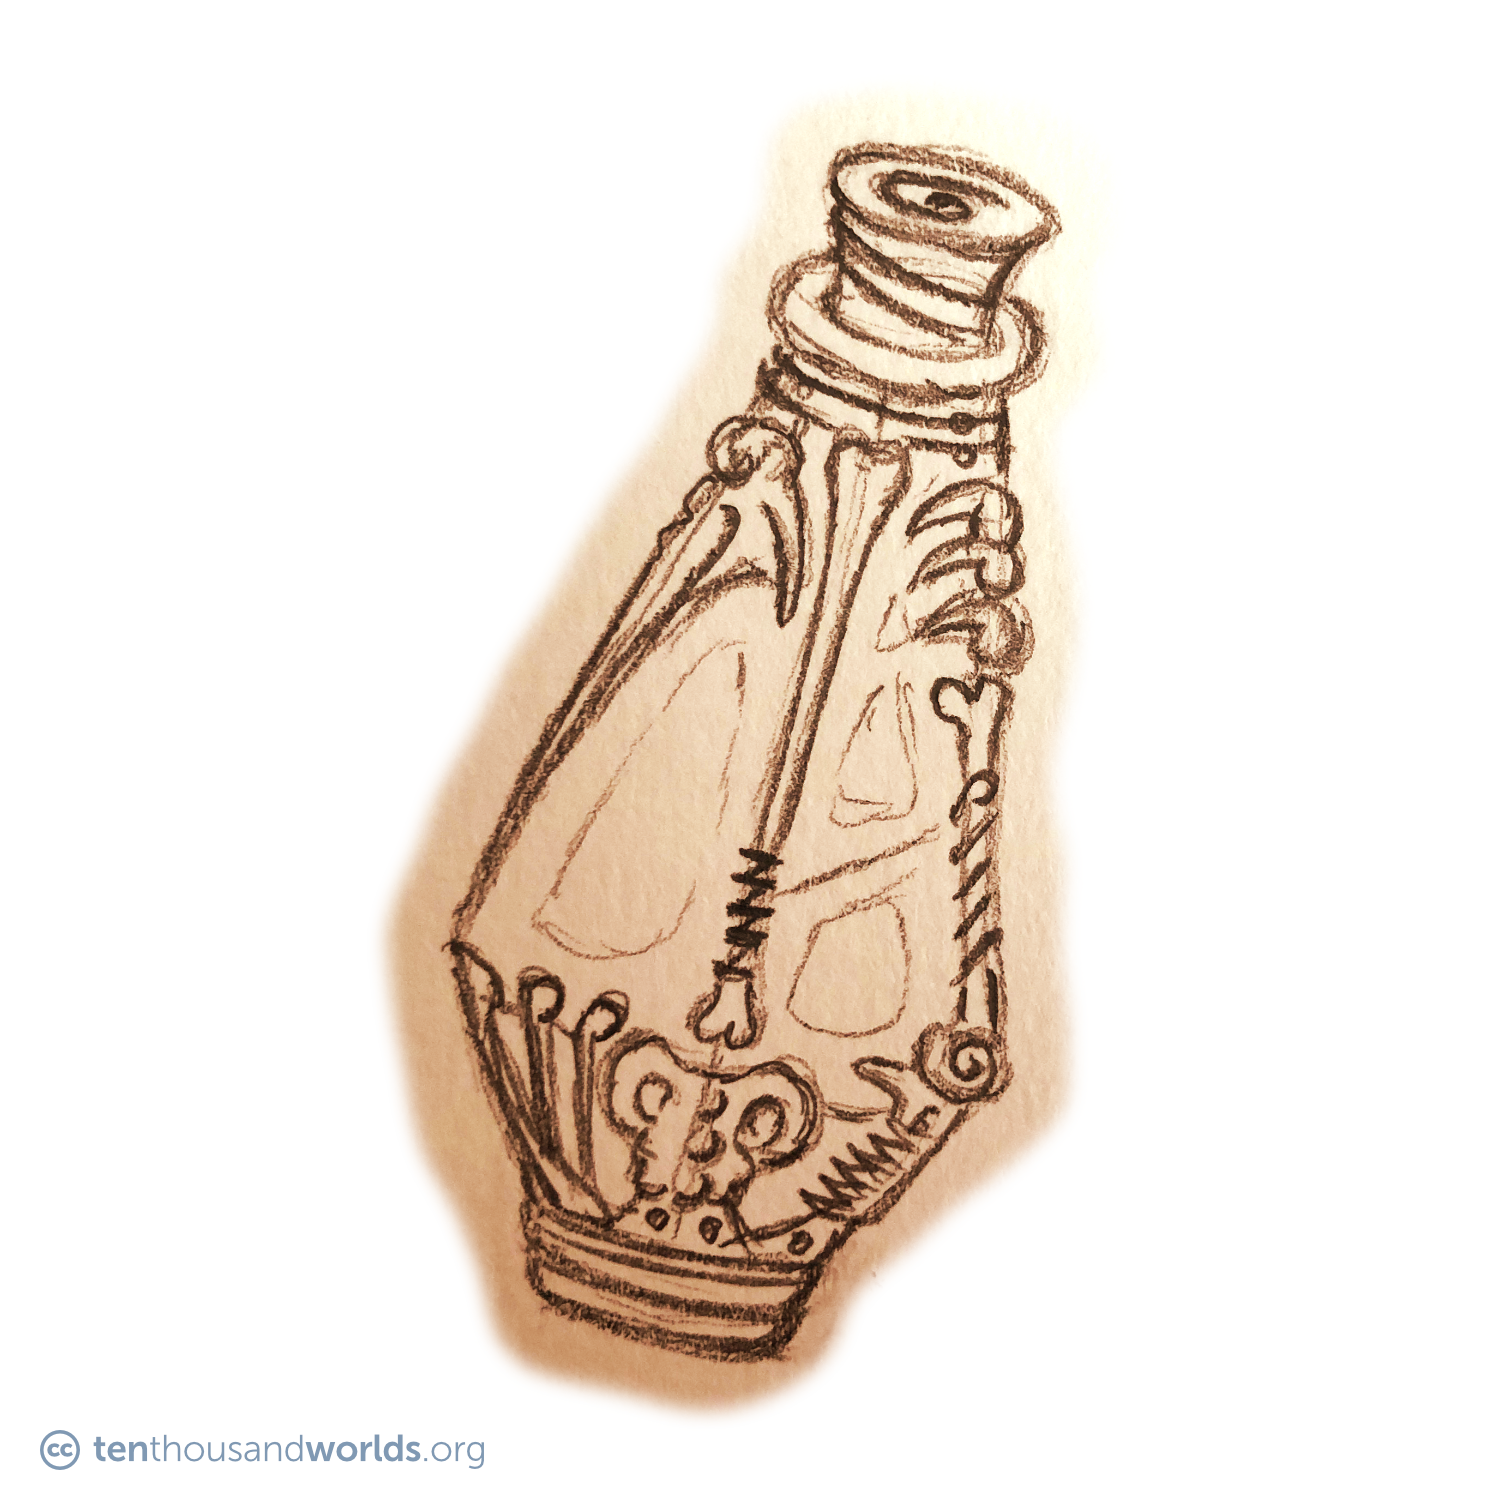 A pencil sketch of a tall, intricately decorated stoppered bottle made of fused glass, metal and bone.